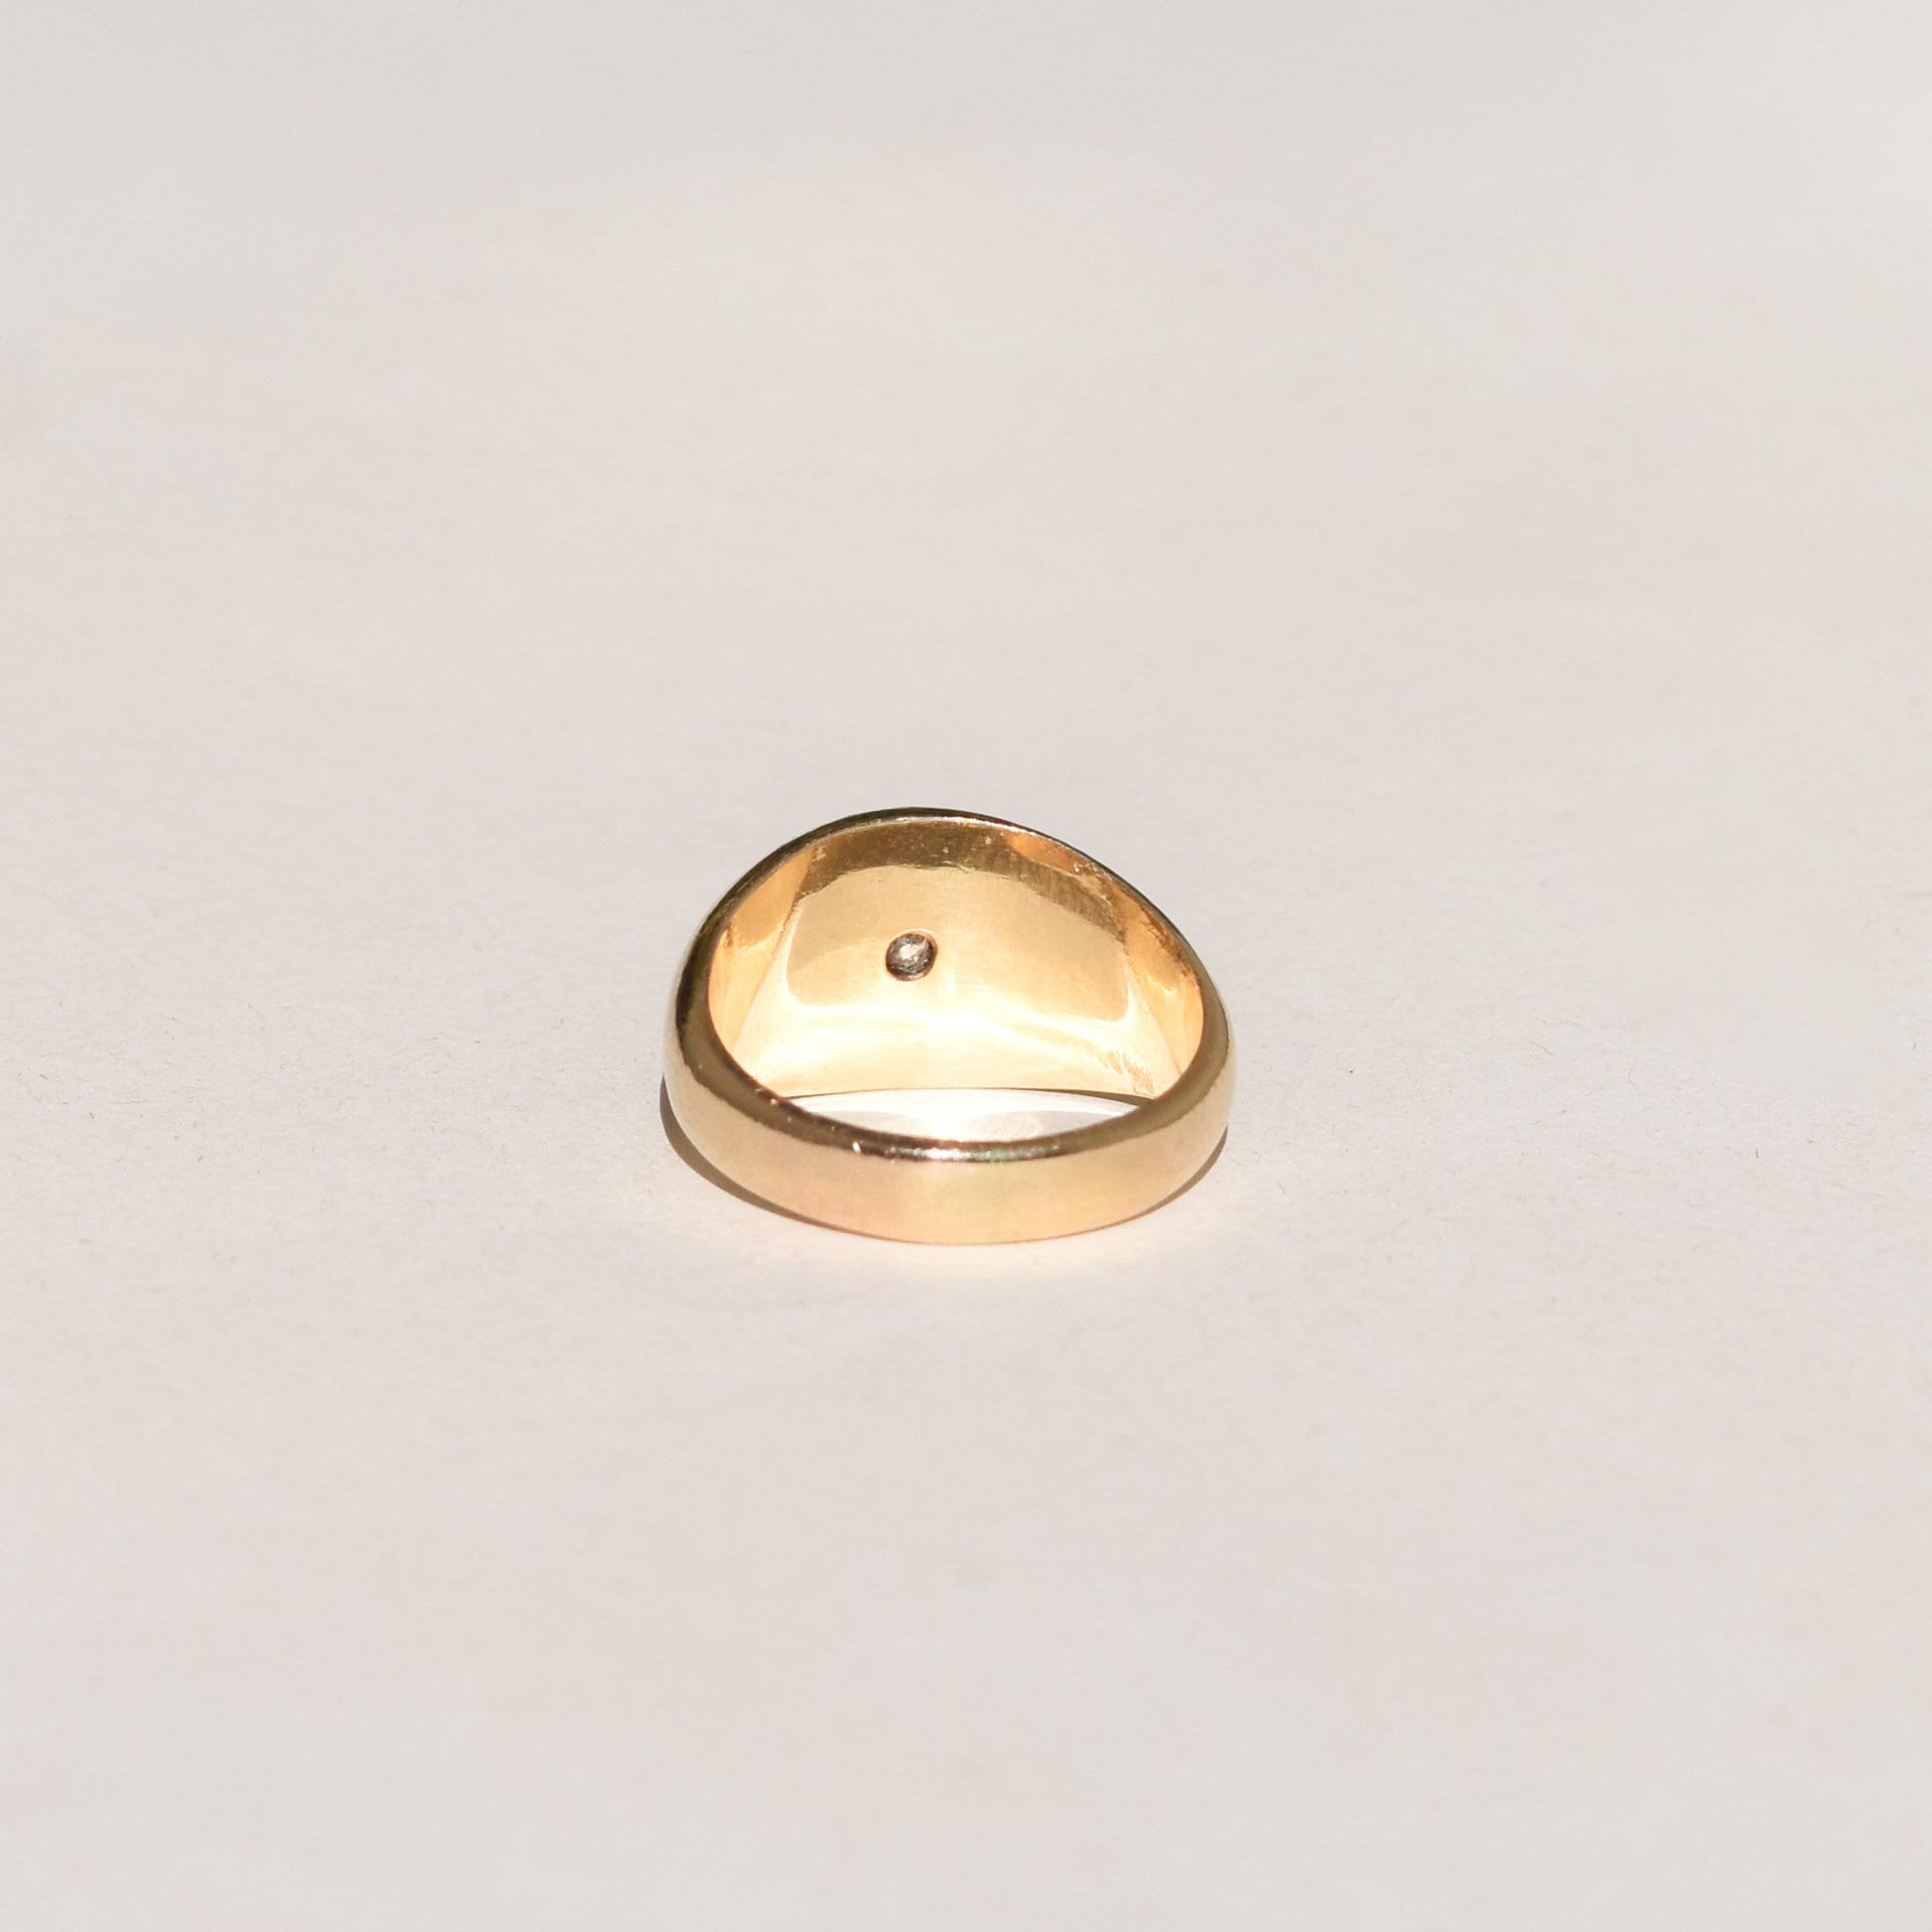 10K yellow gold vintage Victorian paste solitaire dome ring, size 7 US